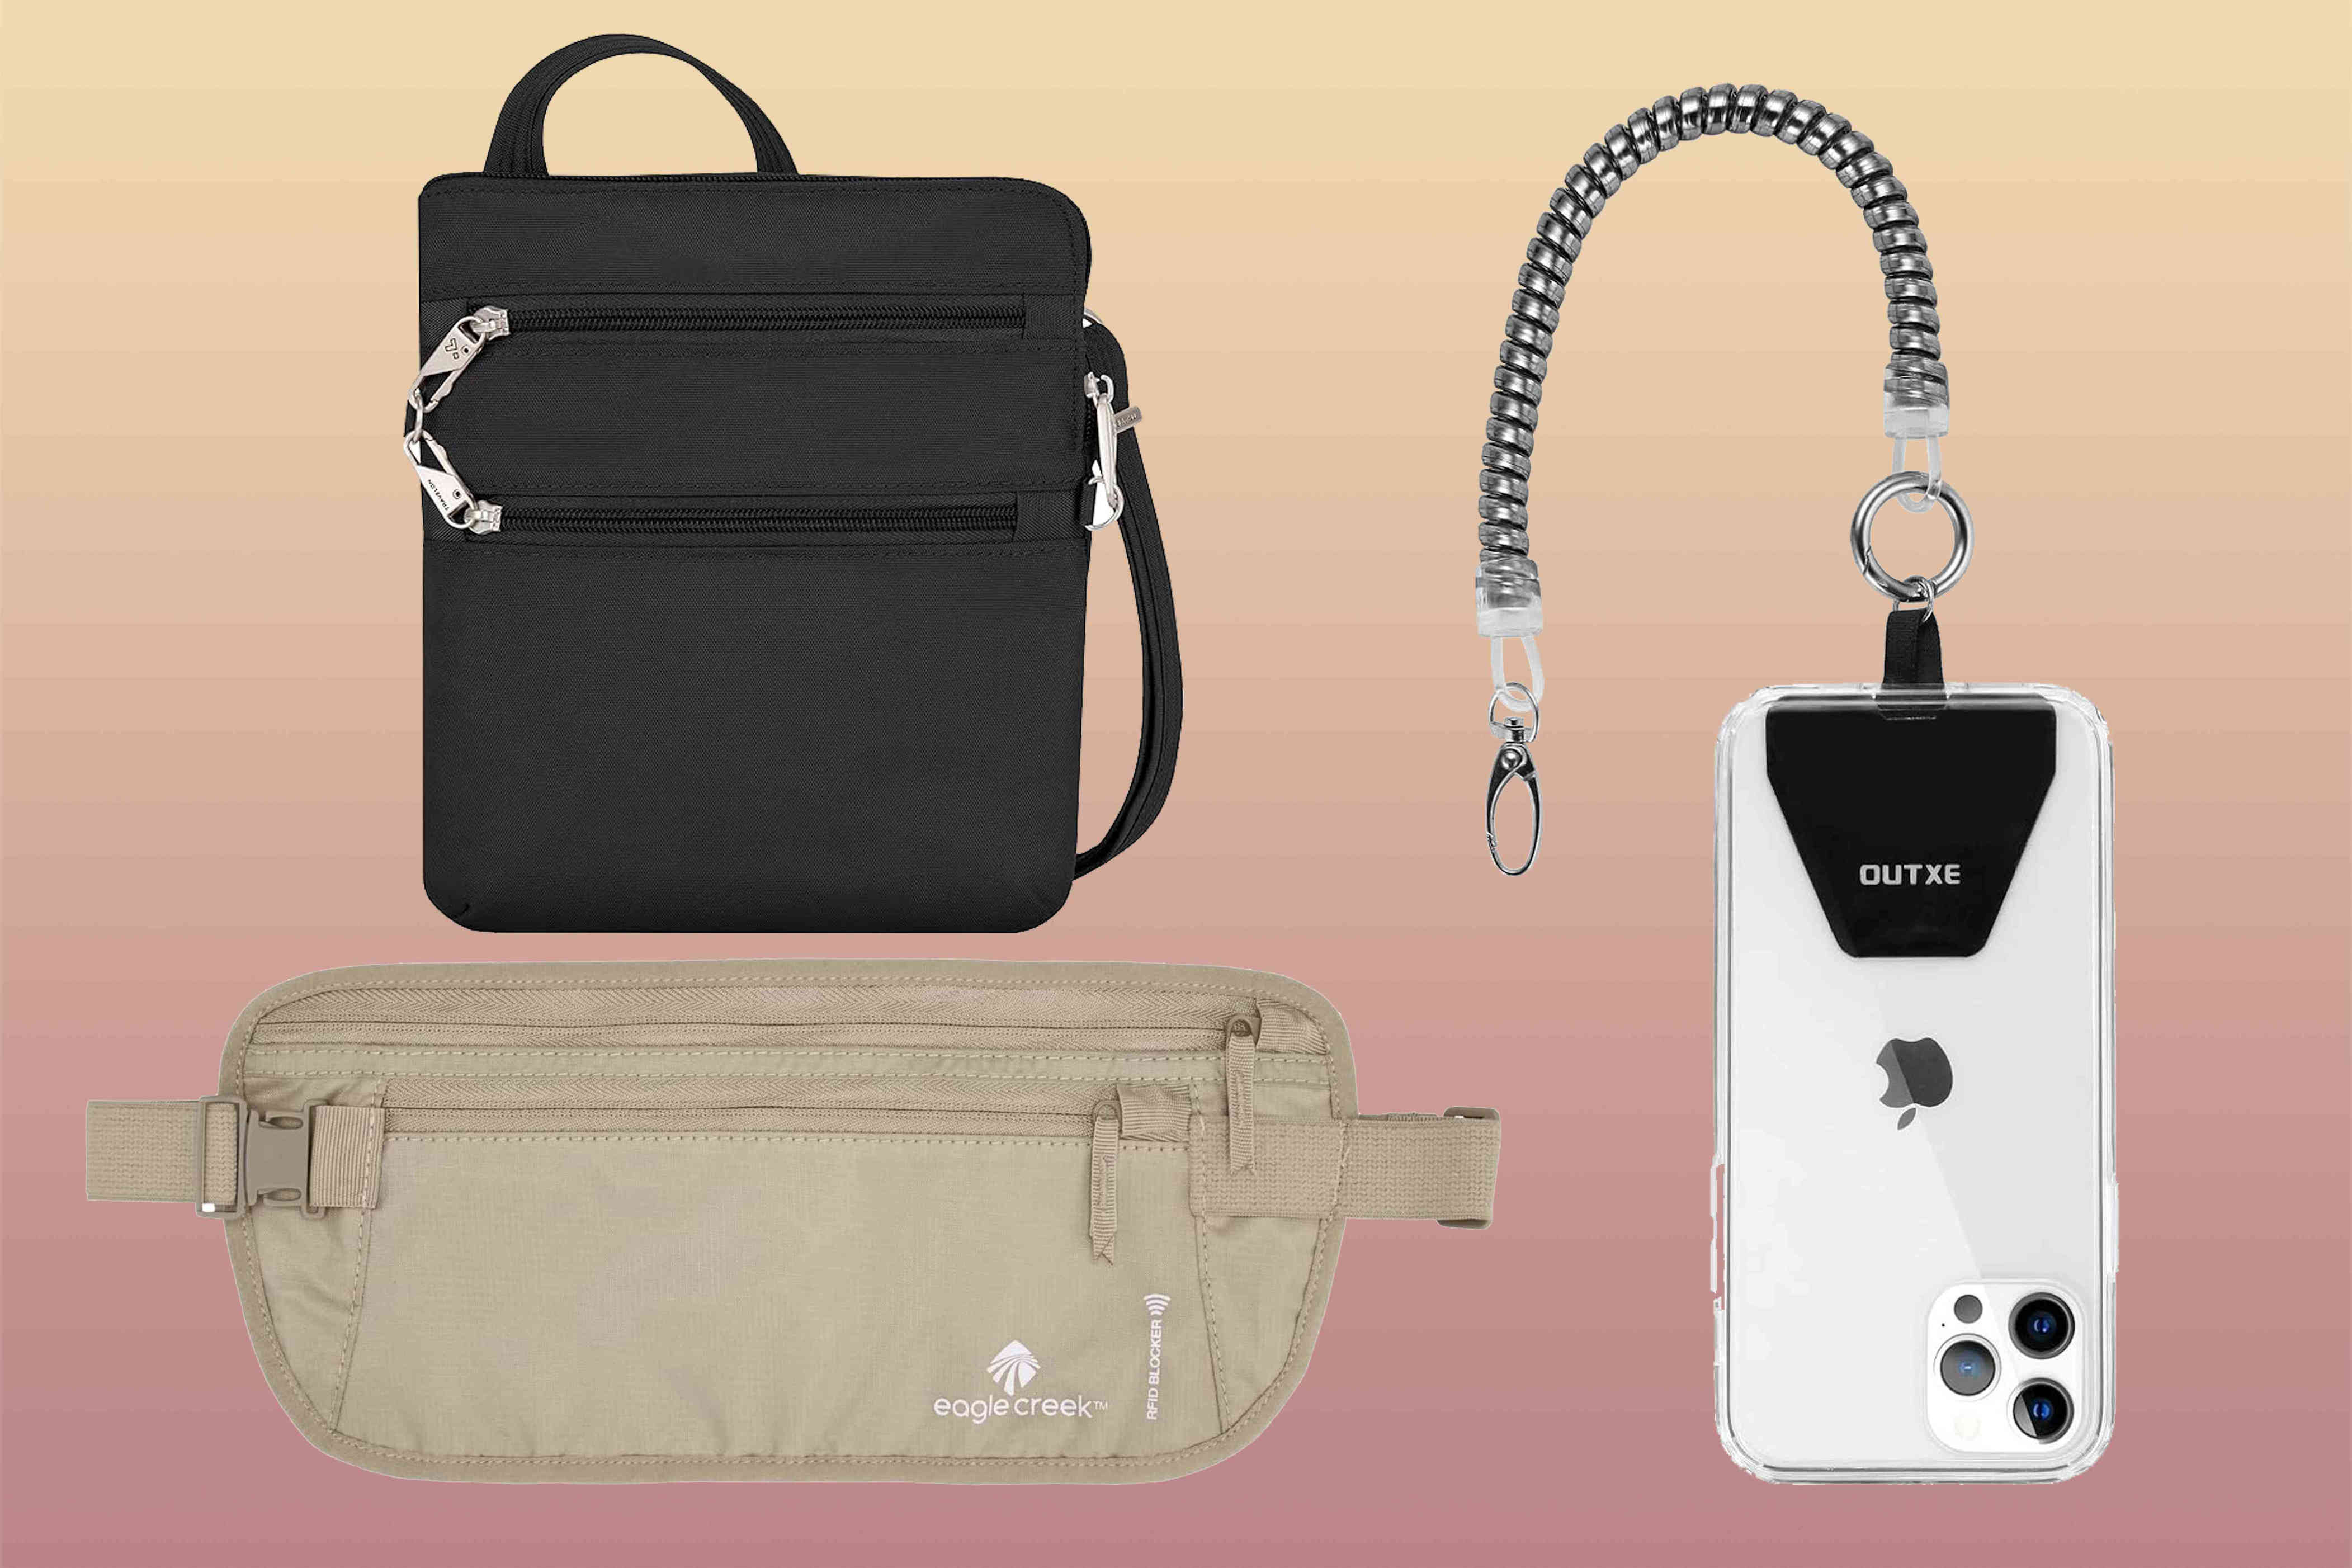 amazon, after watching 1 too many pickpocketing tiktoks, these 6 anti-theft travel accessories give us peace of mind